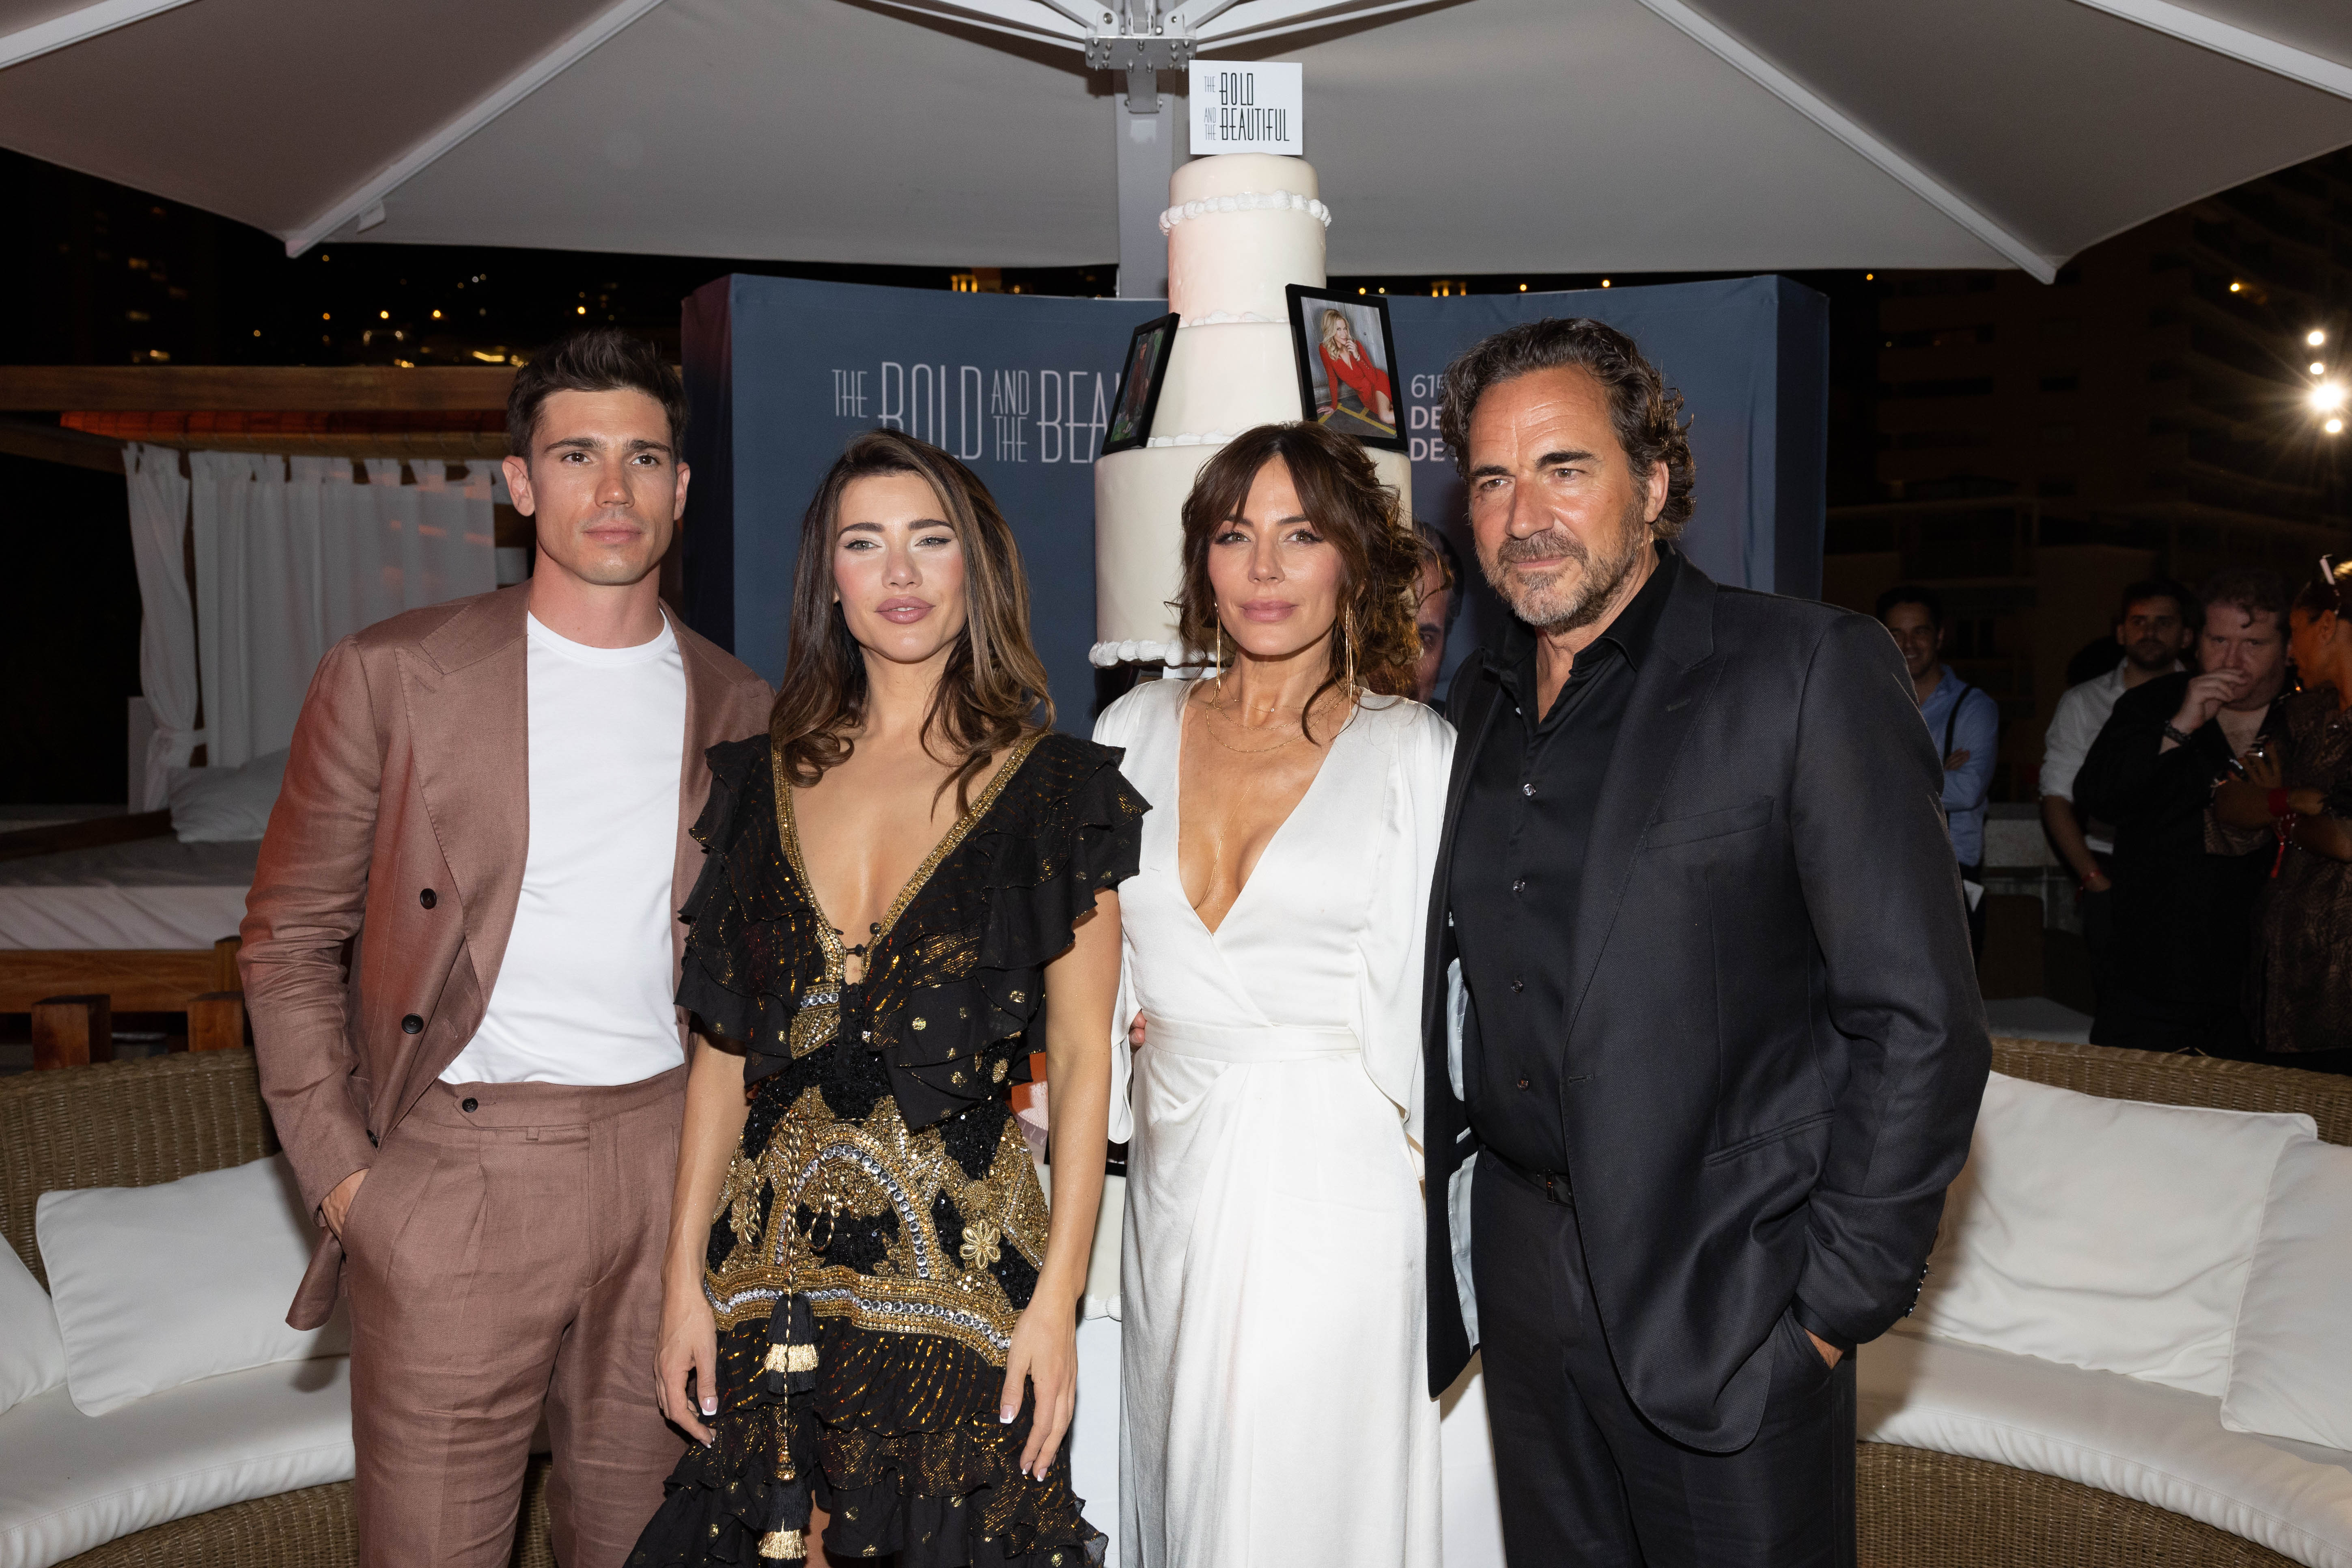 'The Bold and the Beautiful' stars Tanner Novlan, Jacqueline MacInnes Wood, Krista Allen, and Thorsten Kaye posing for a group photo.